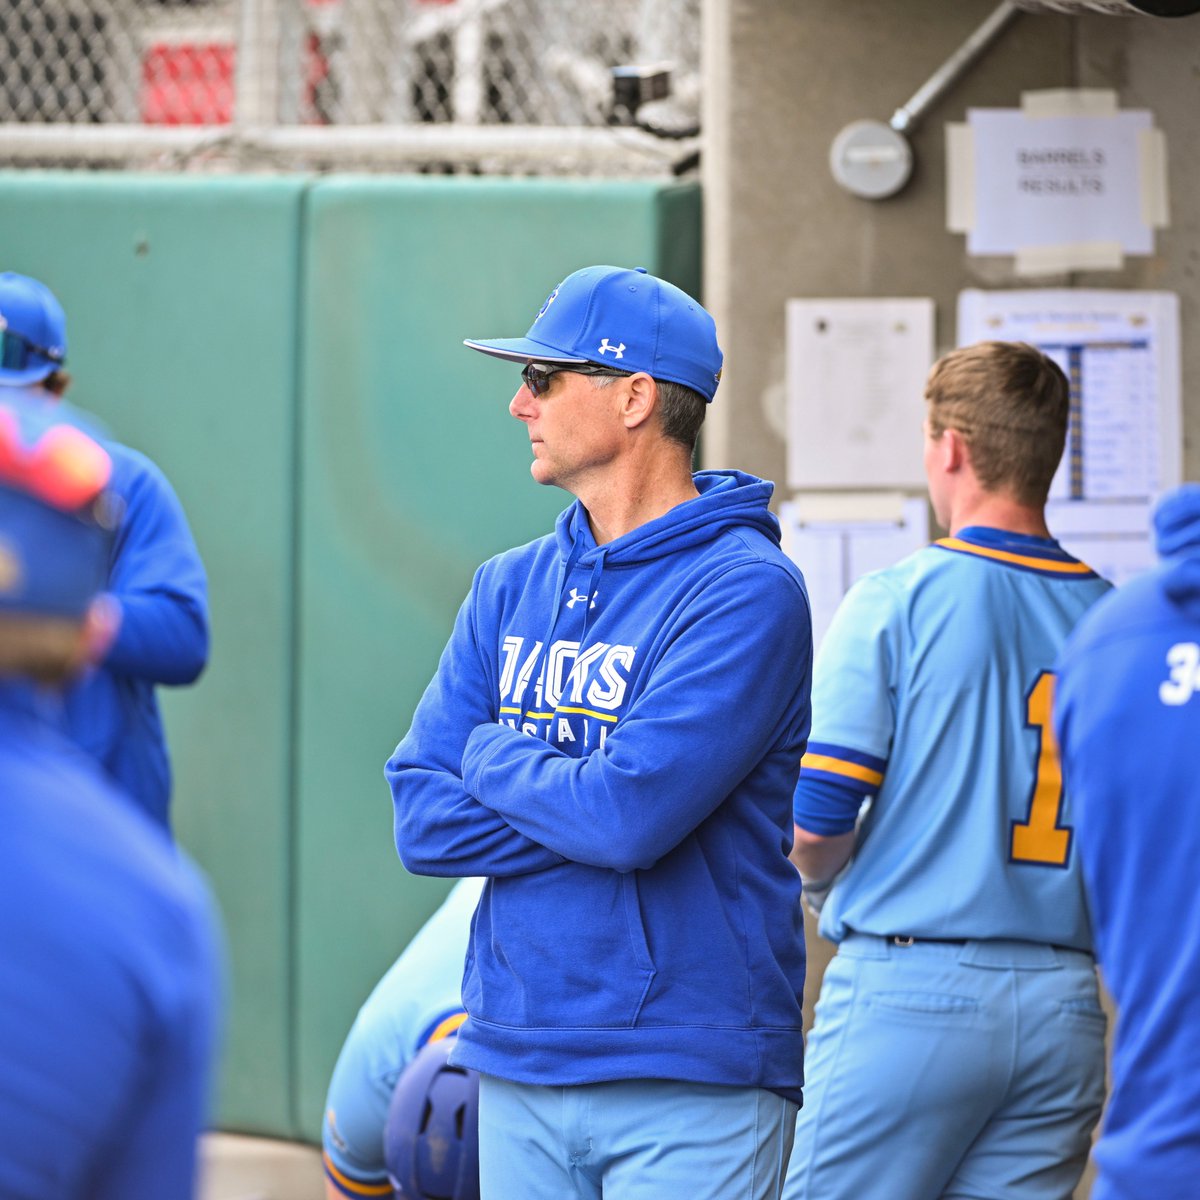 ICYMI | Rob Bishop earned his 700th career victory last week in a @GoJacksBaseball win over NDSU! 👏 The Jacks will play their HOME OPENER today at 3pm against Northwestern at Erv Huether Field! #GoJacks 🐰